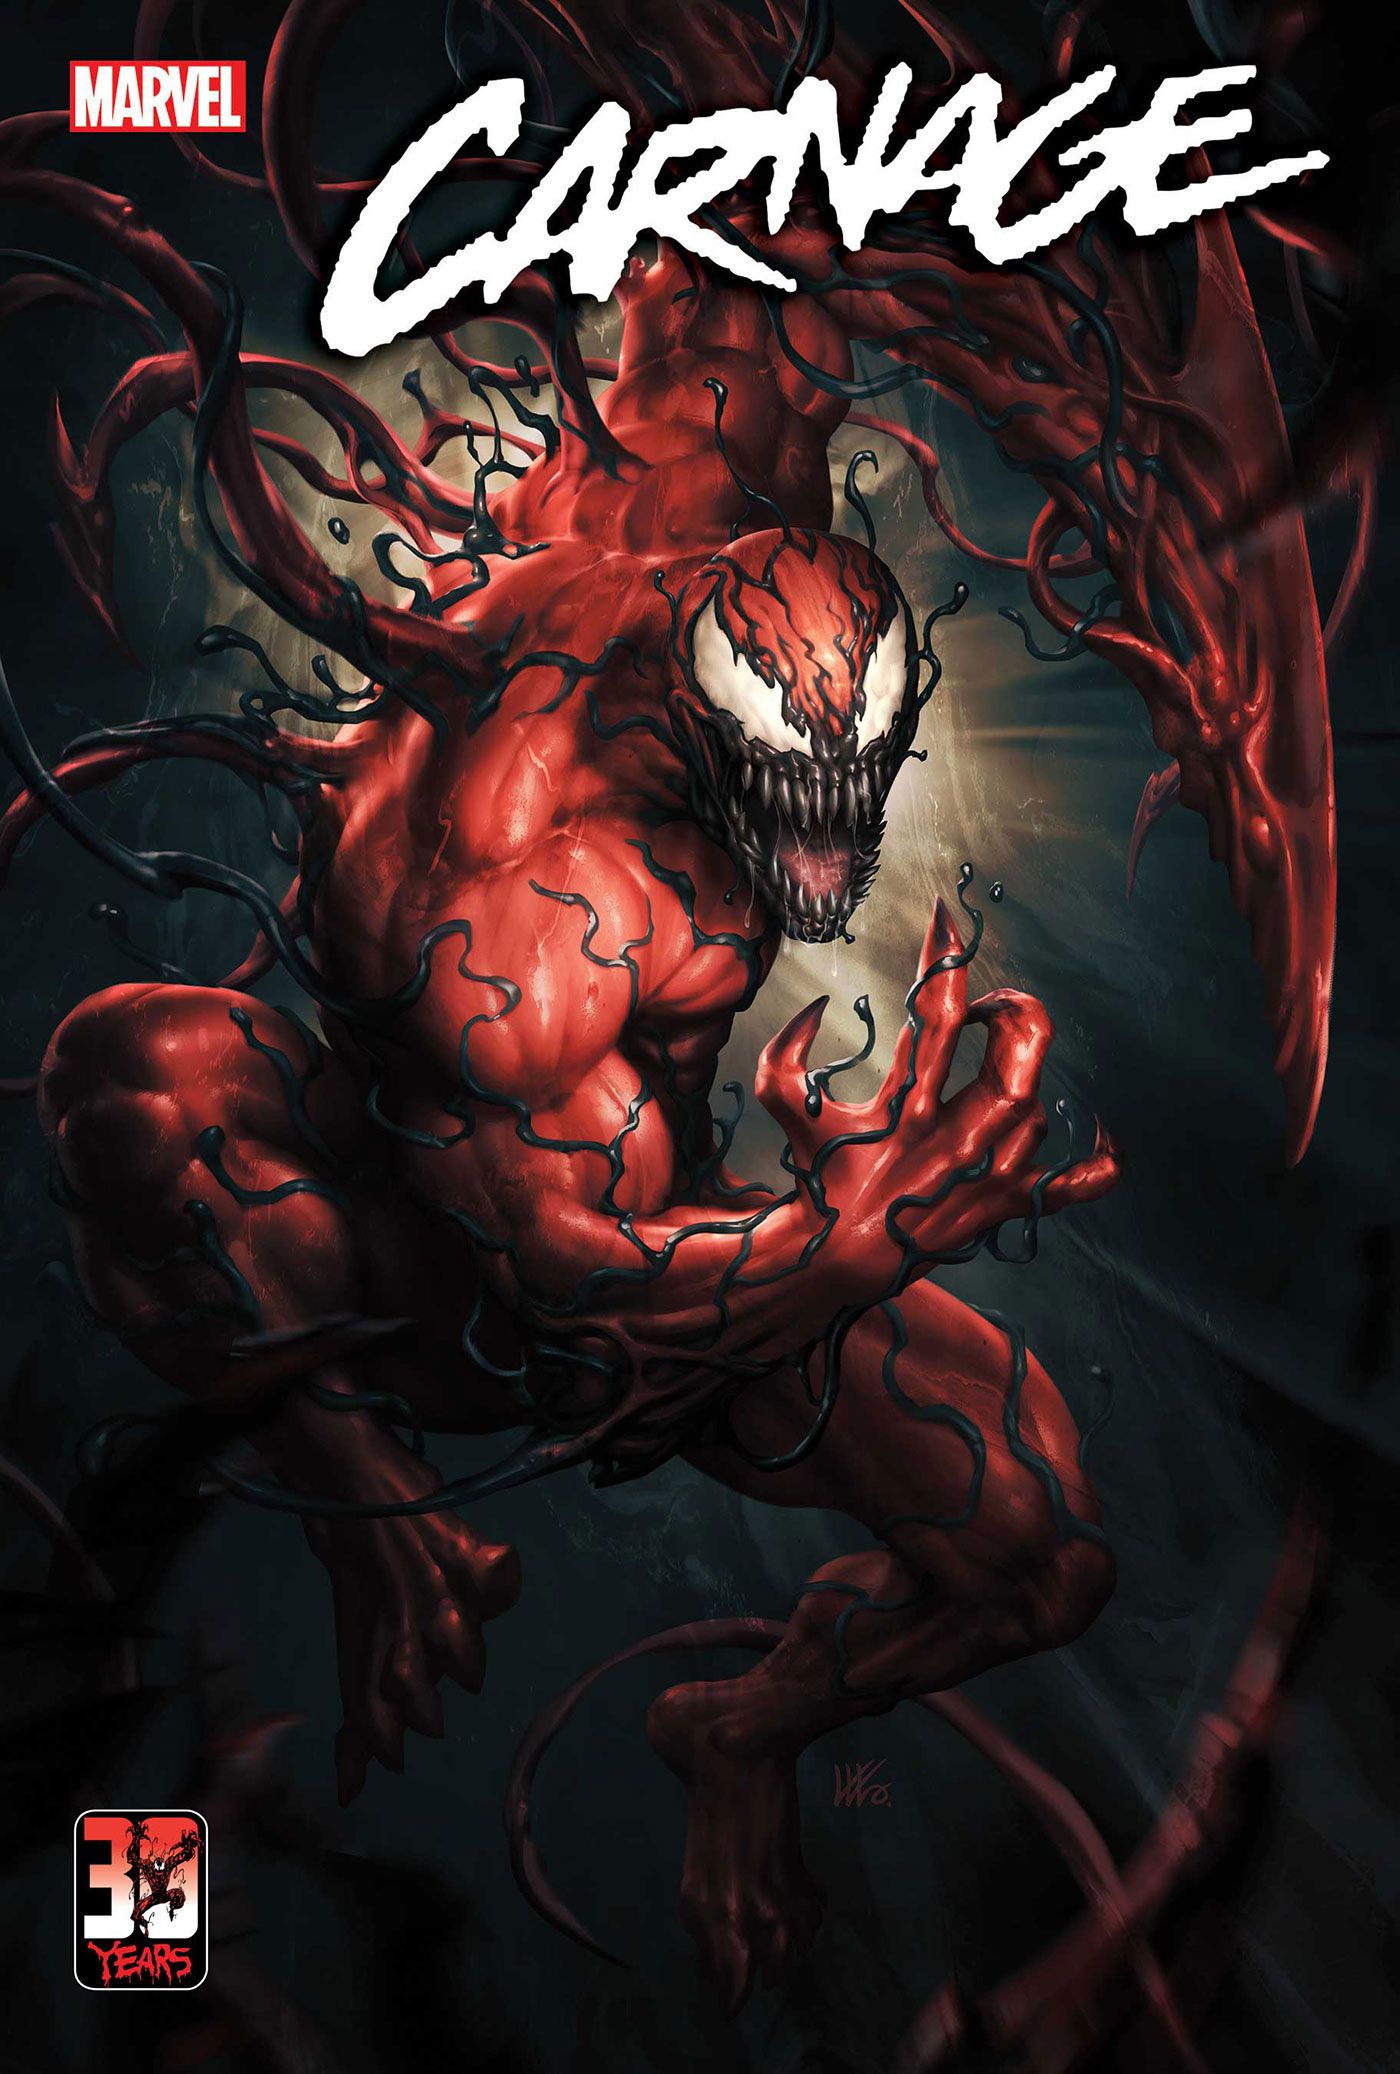 Marvel's new symbiote on the cover of Carnage 1 by Kendrik Kunkka Lim